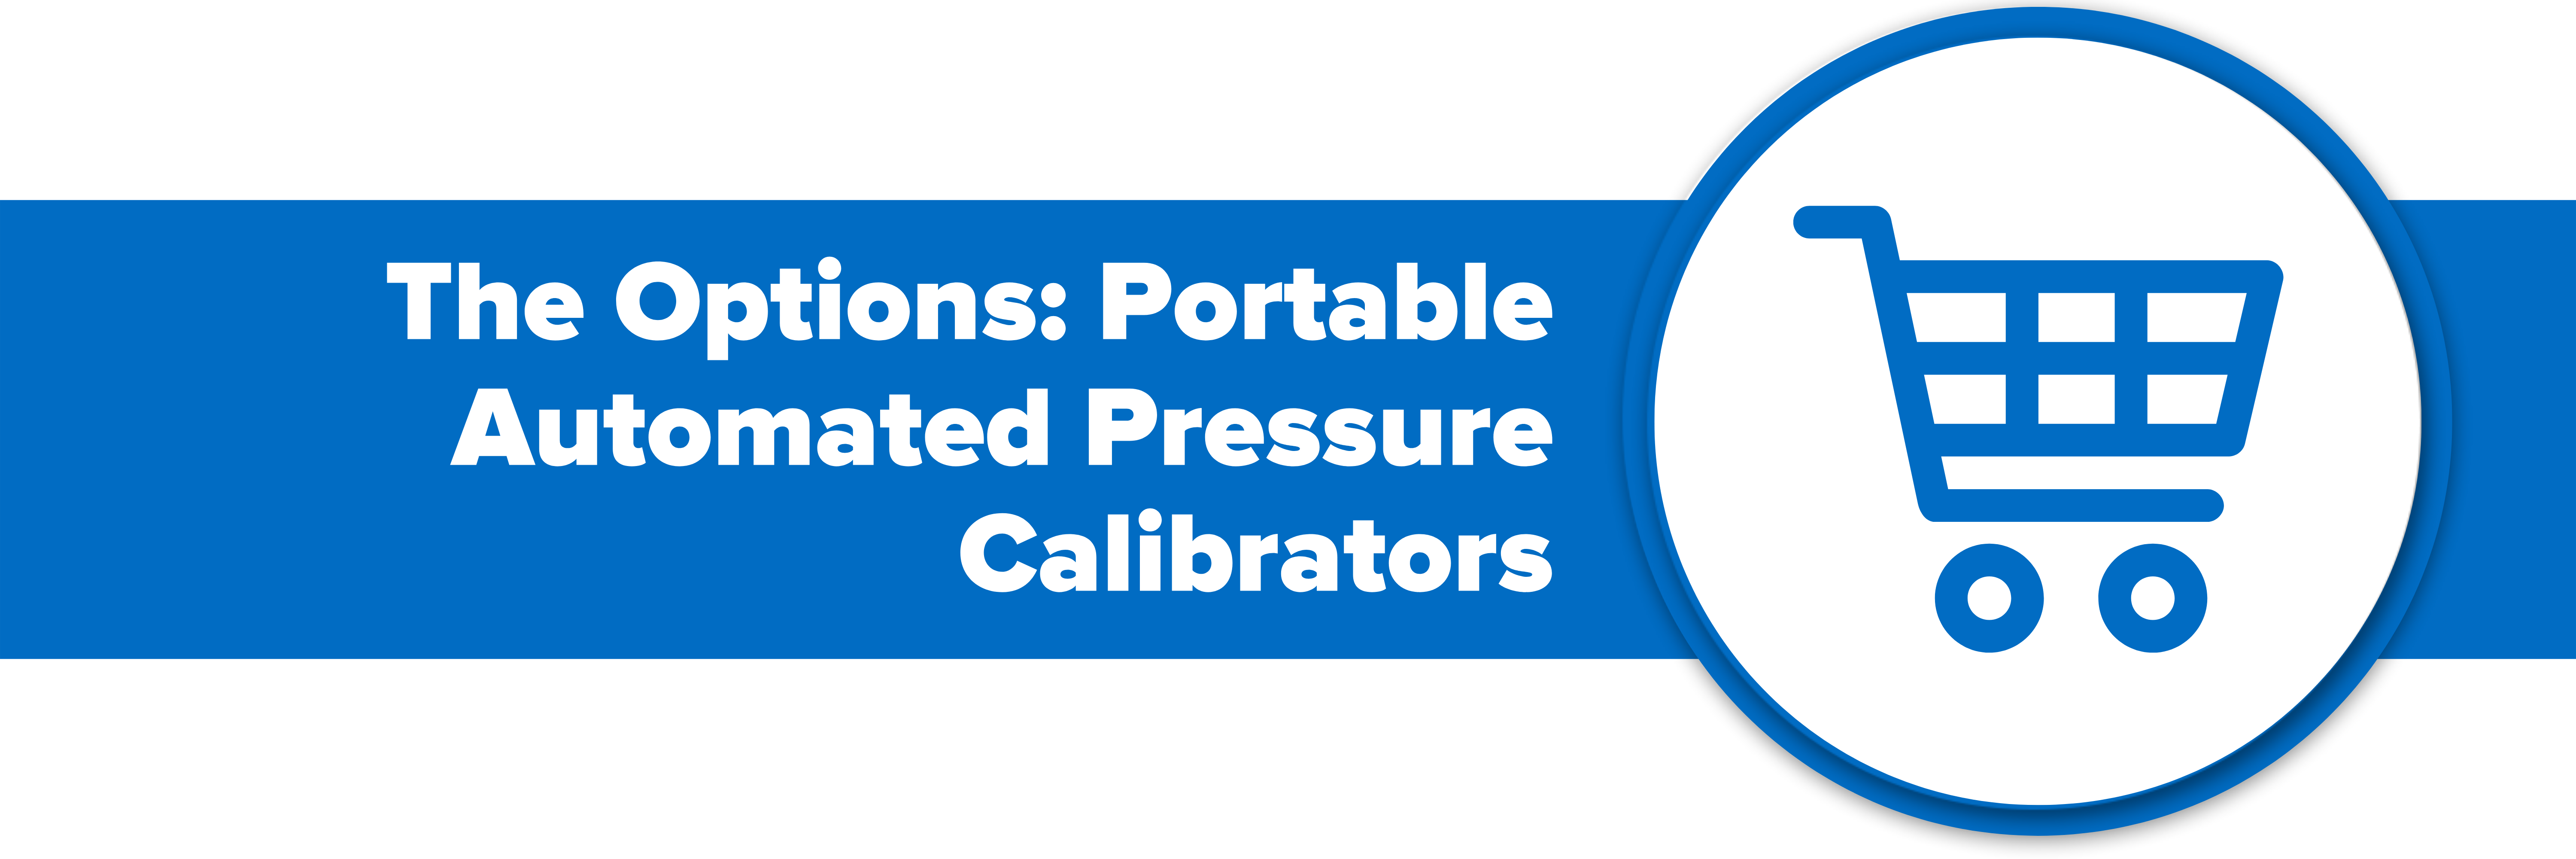 Header image with text "The Options: Portable Automated Pressure Calibrators"